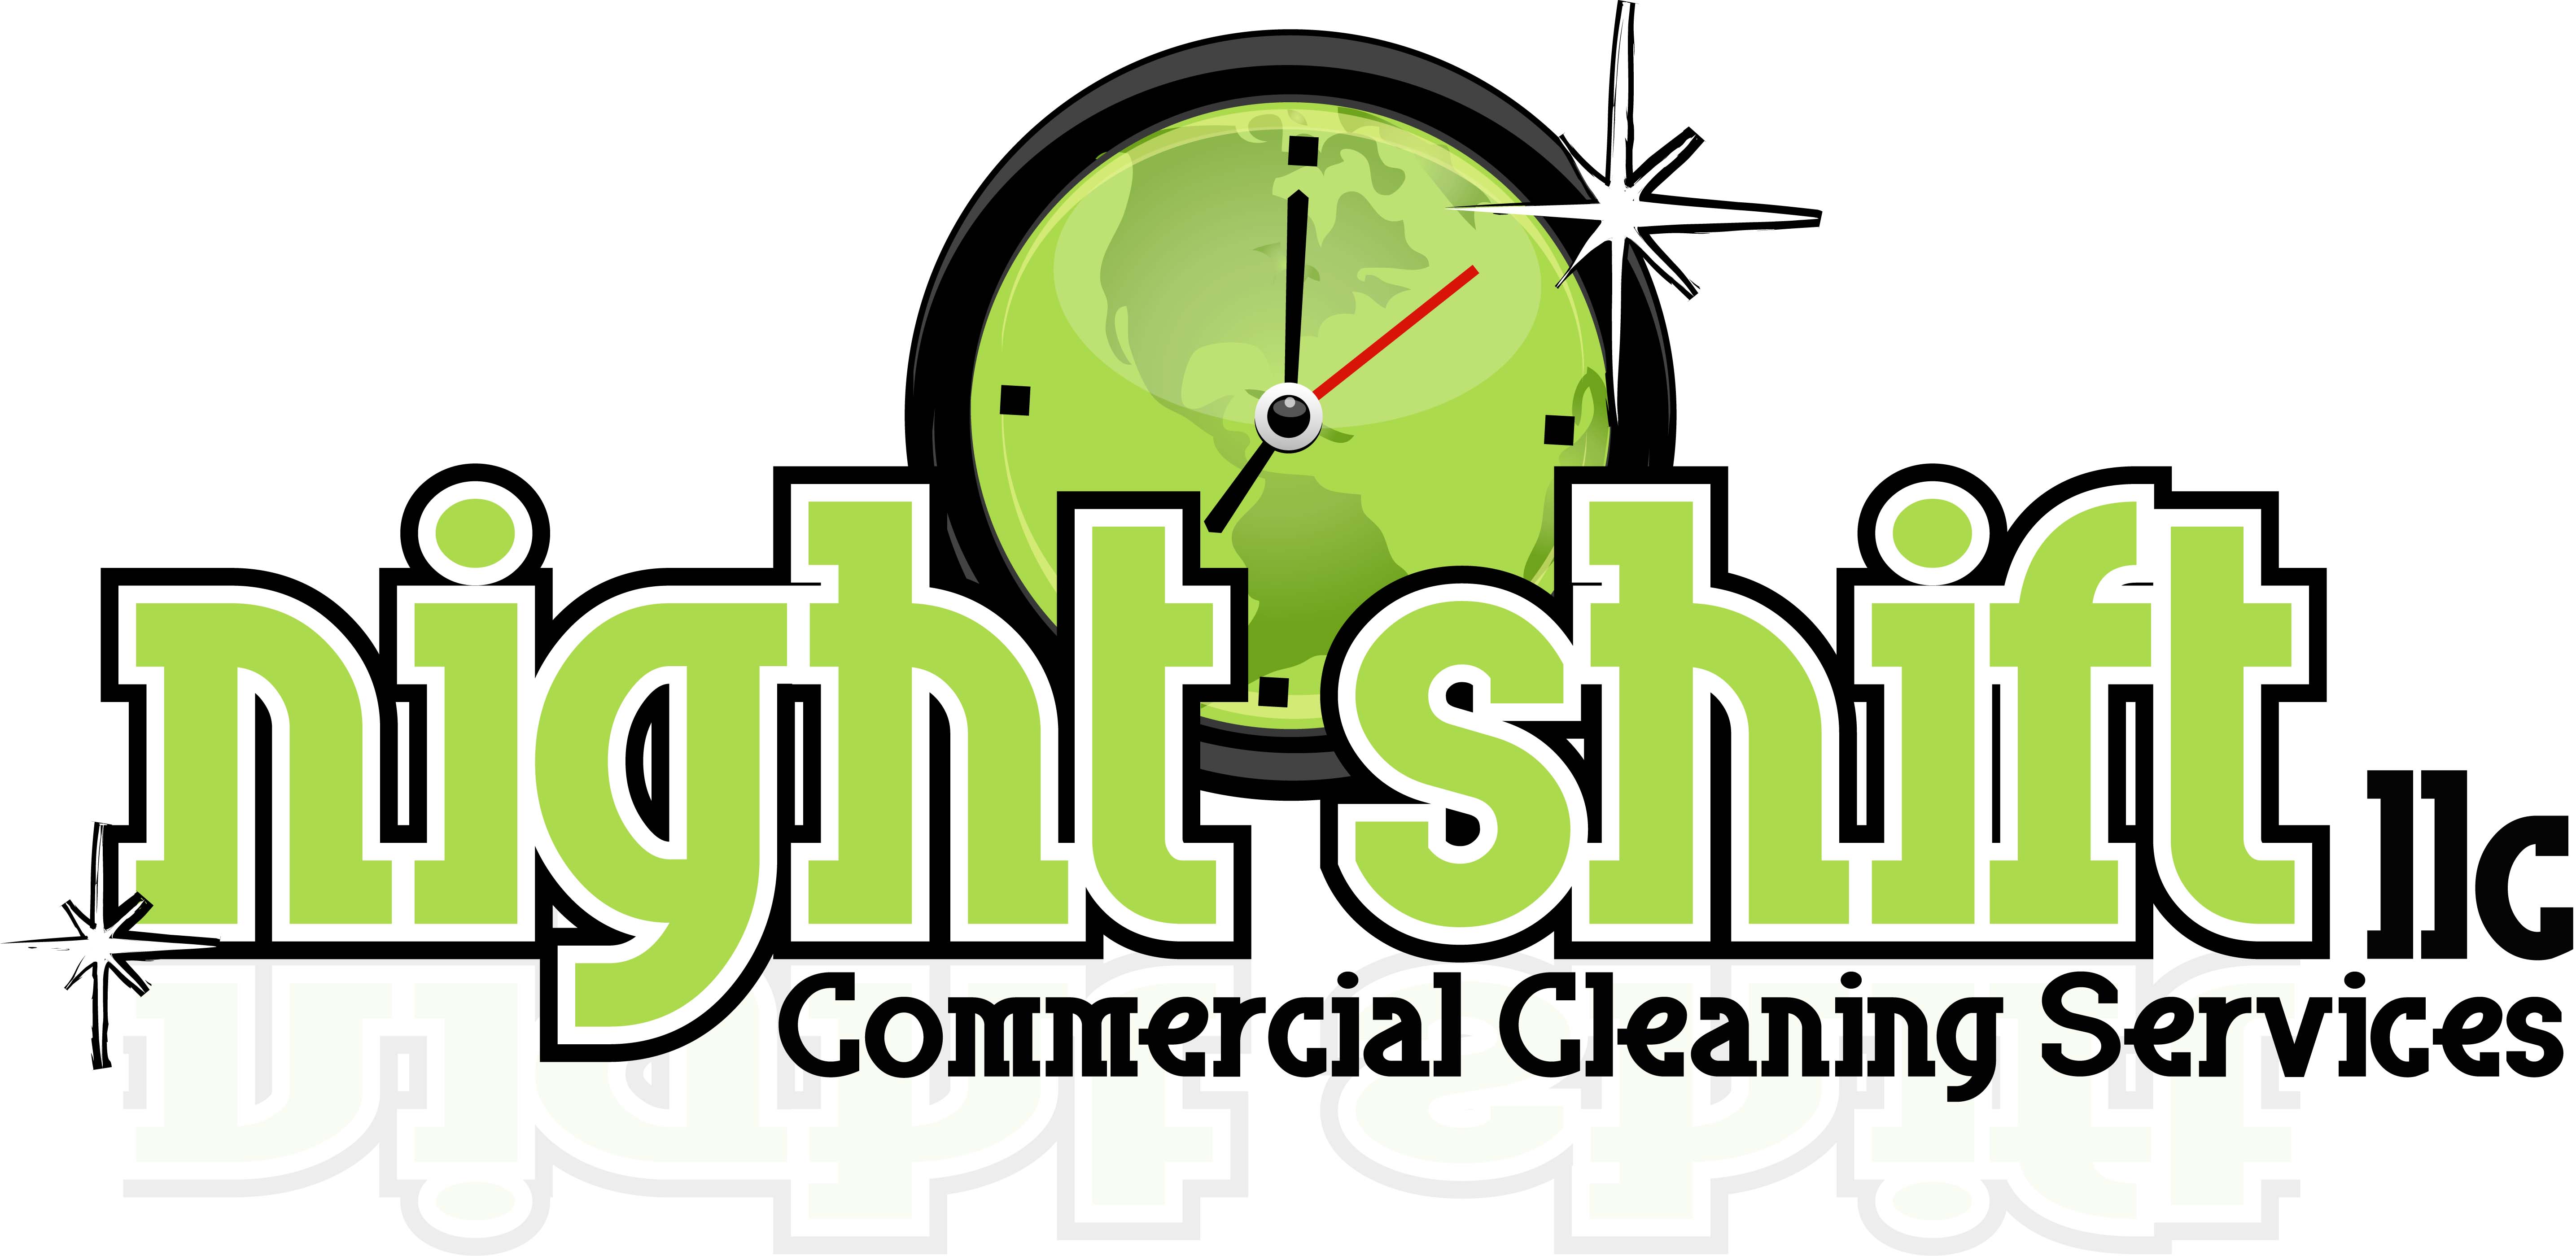 Night Shift Commercial Cleaning Services